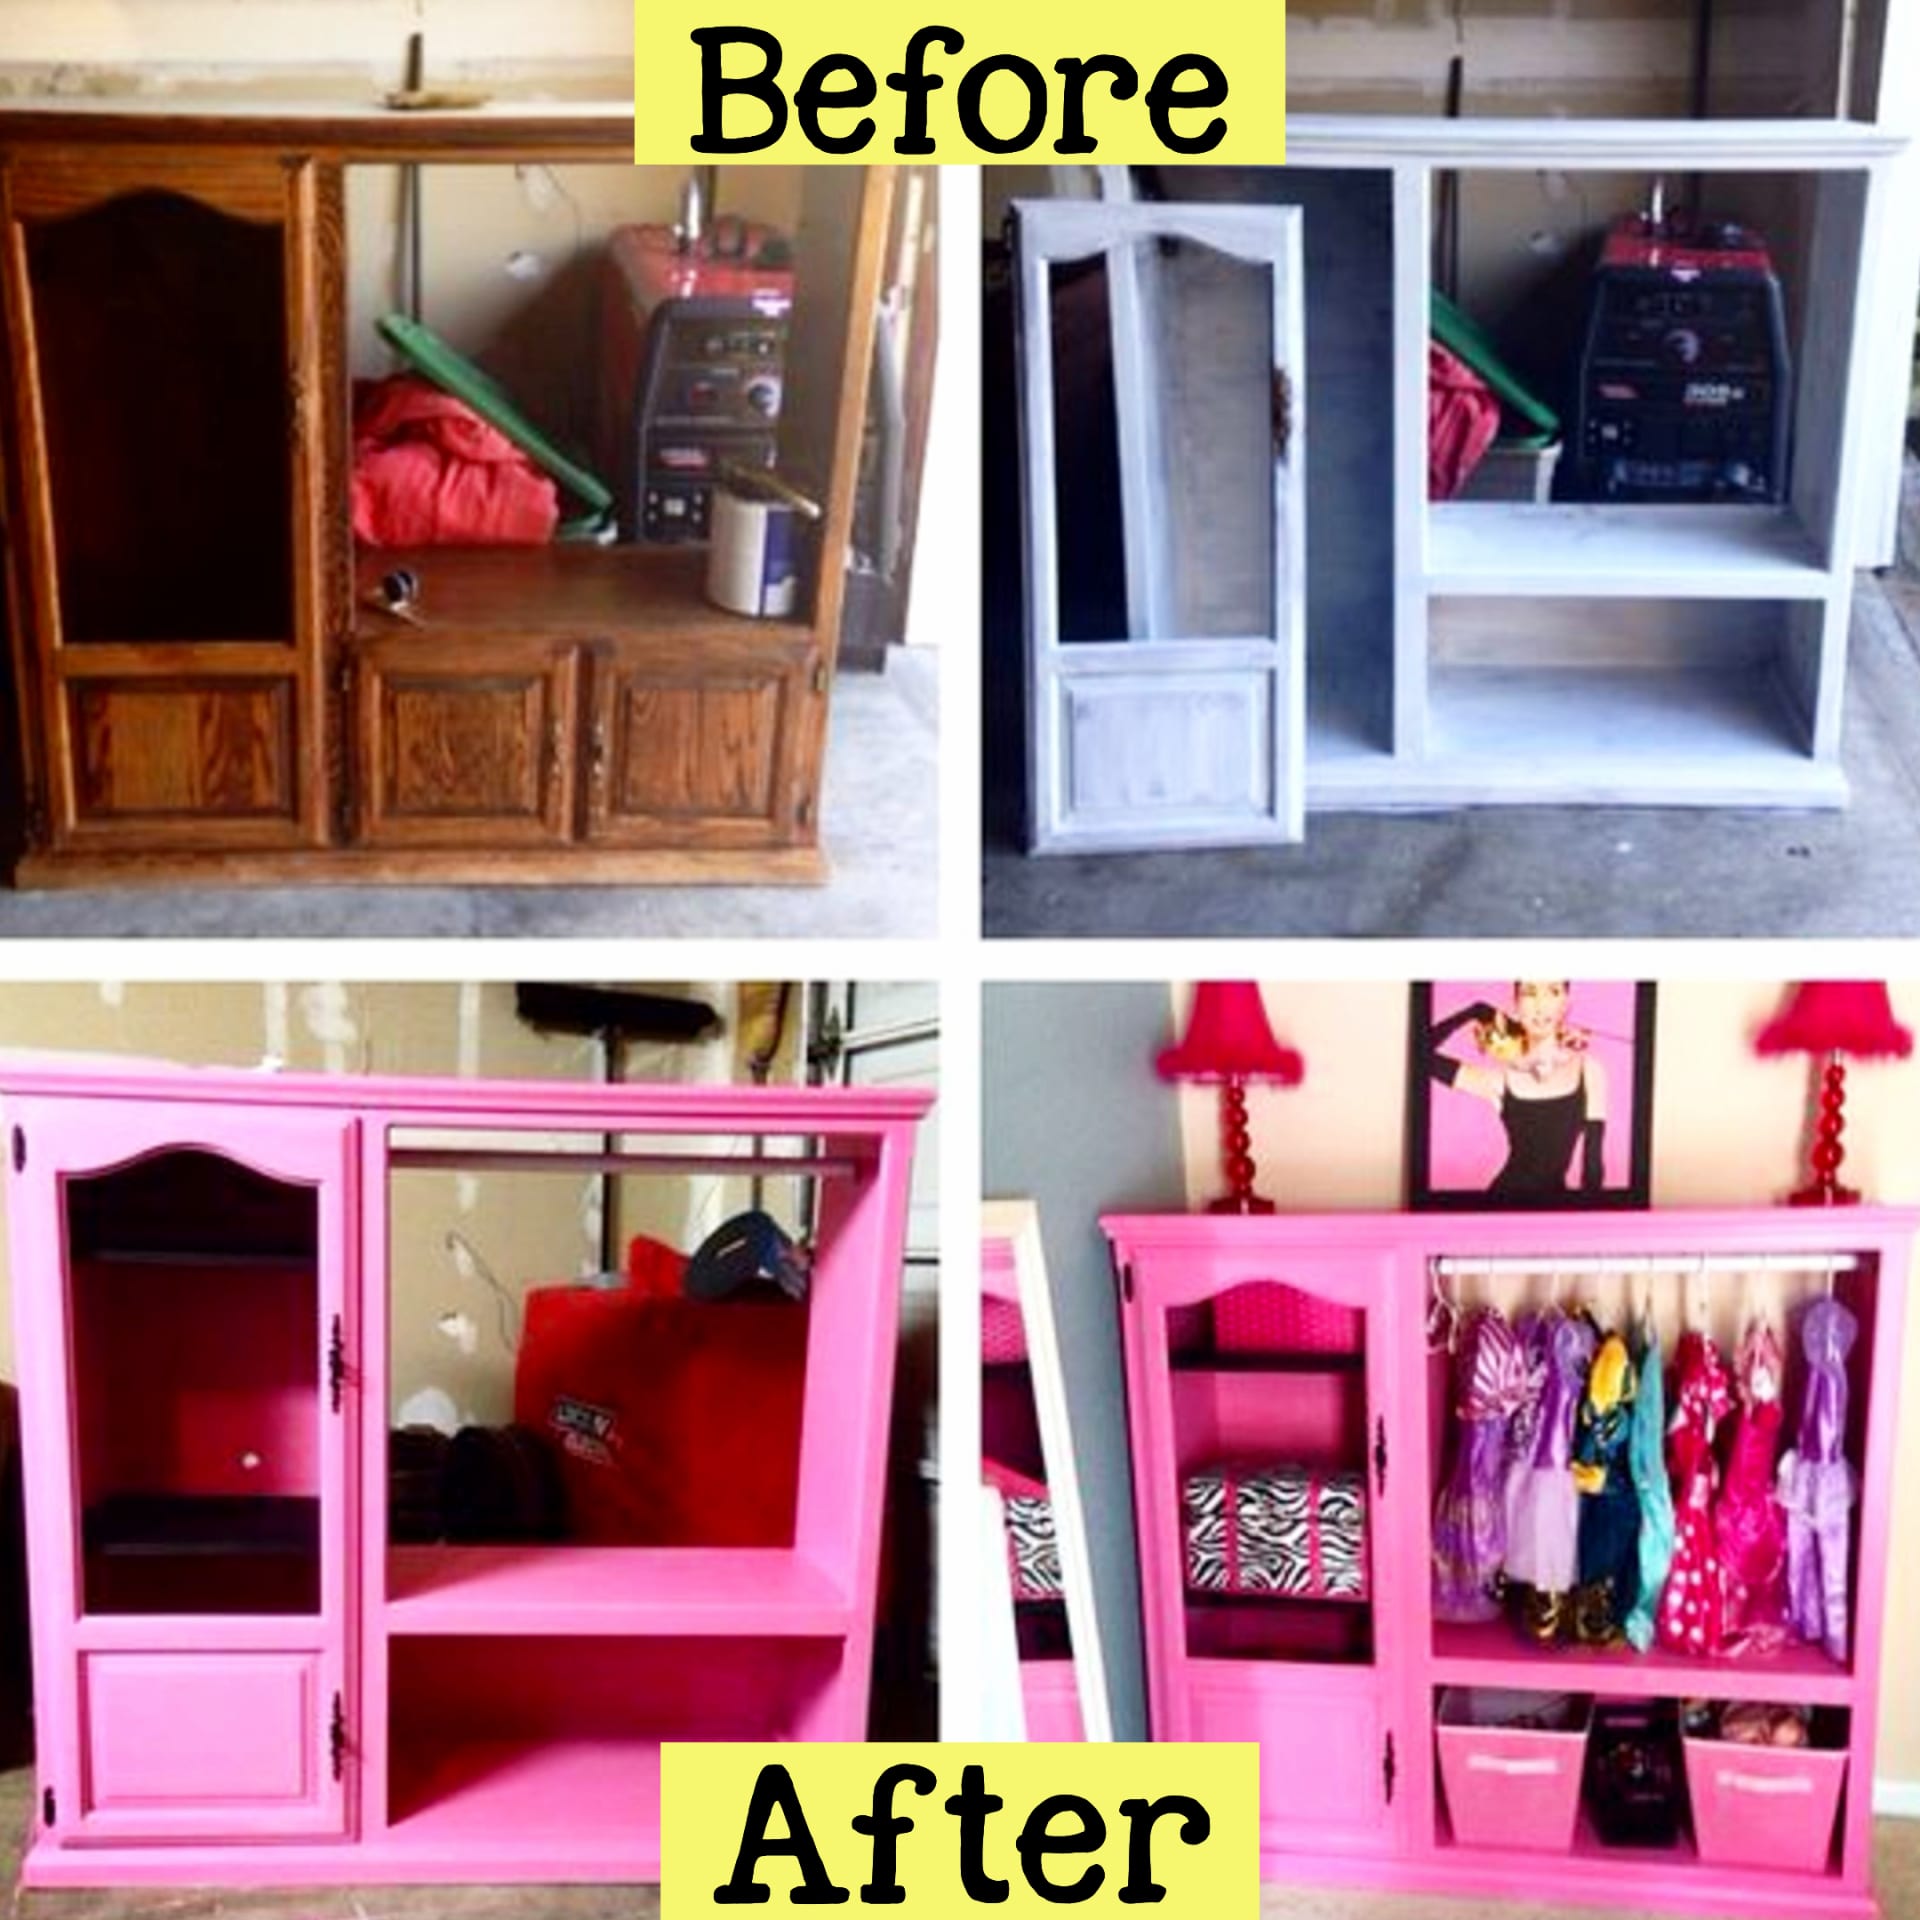 repurposed furniture ideas - turn an old entertainment center into a storage wardrobe dresser for a little girl's bedroom - repurposed dressers and old furniture ideas